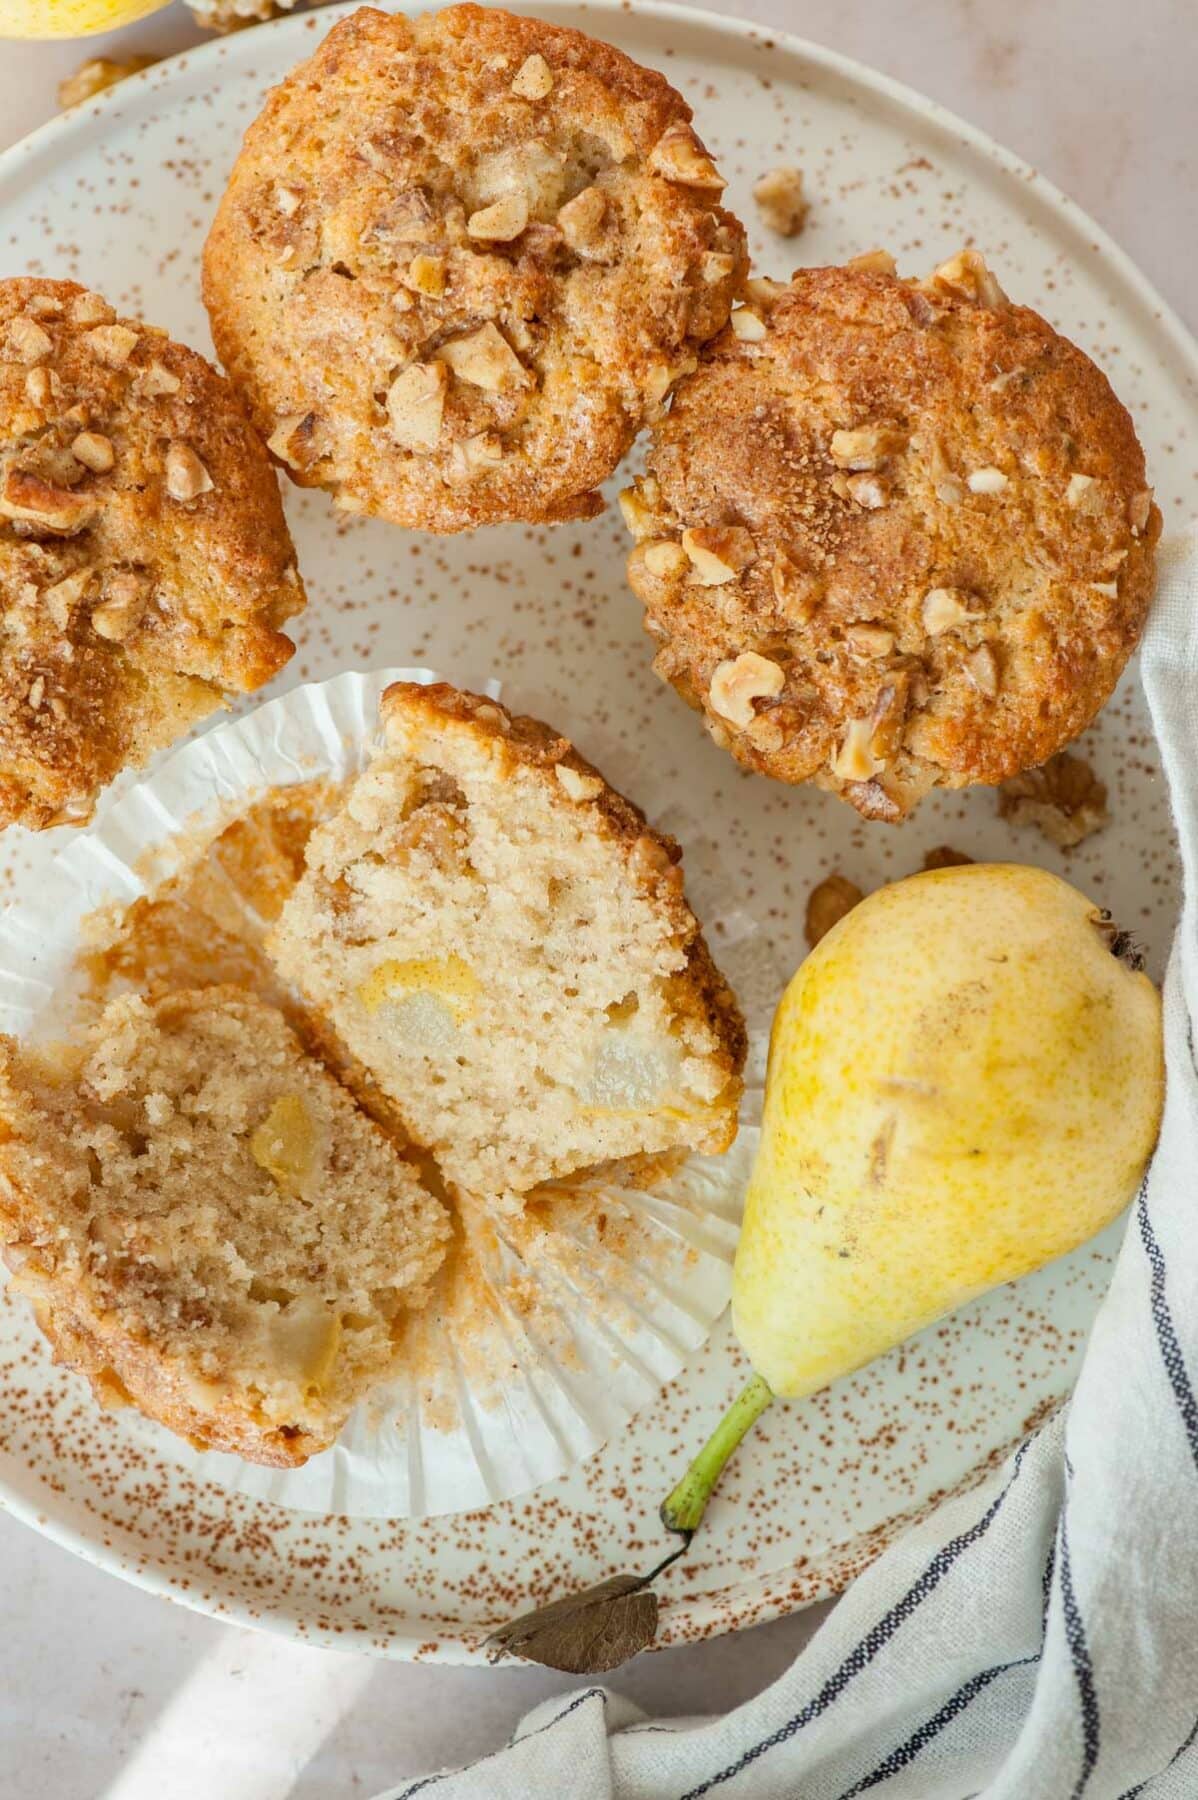 Pear muffins, walnuts, and pears on a white plate. One muffin cut in half. View from above.